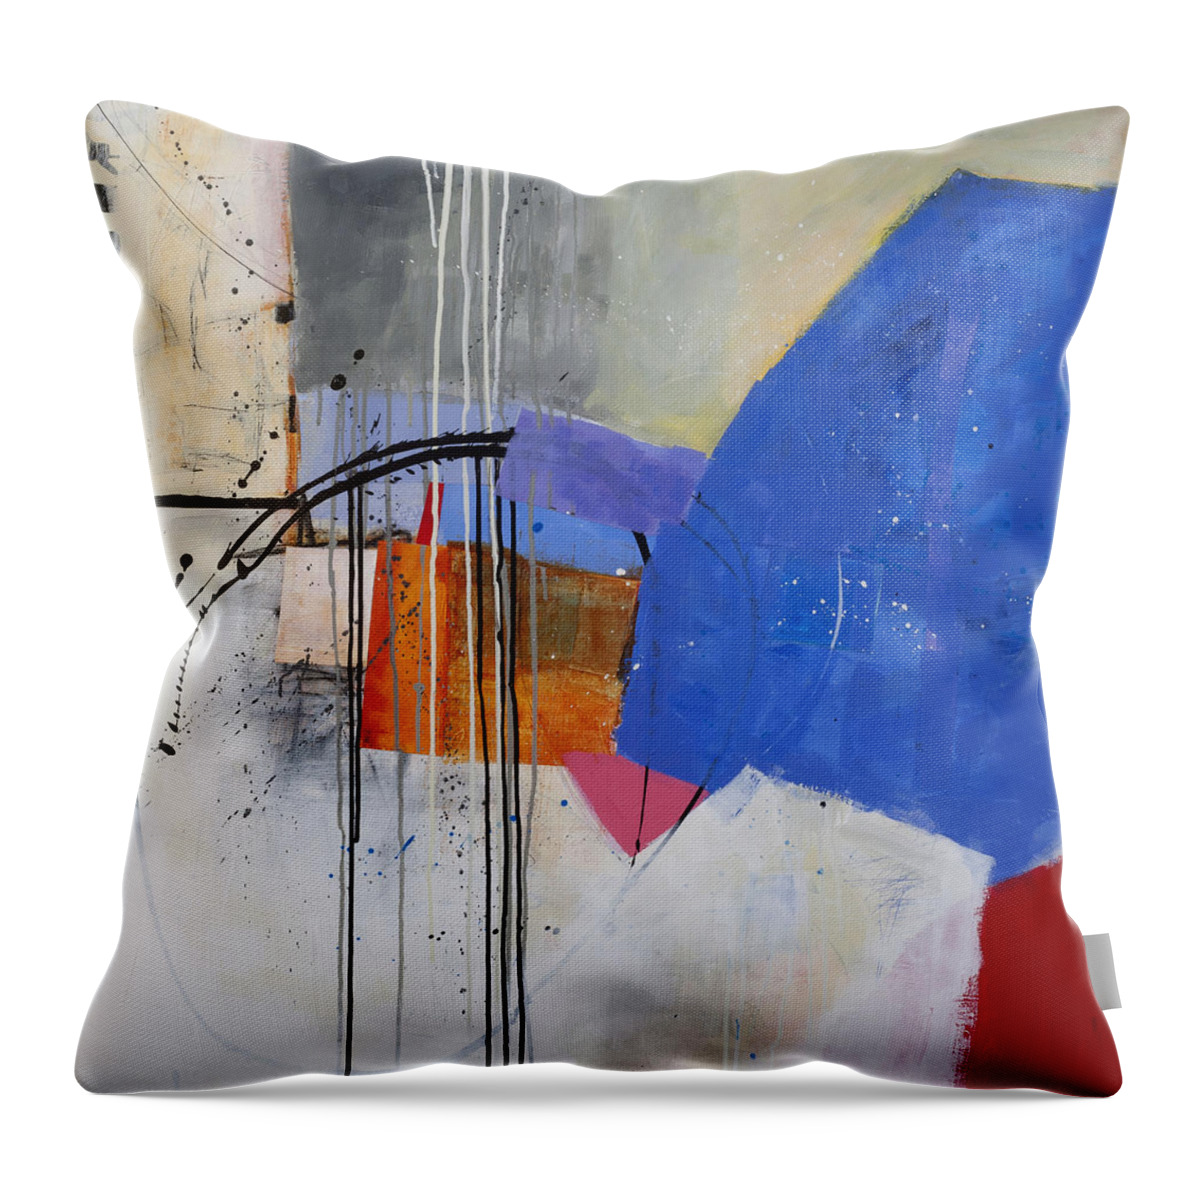 Abstract Art Throw Pillow featuring the painting Scaled Up 1 by Jane Davies